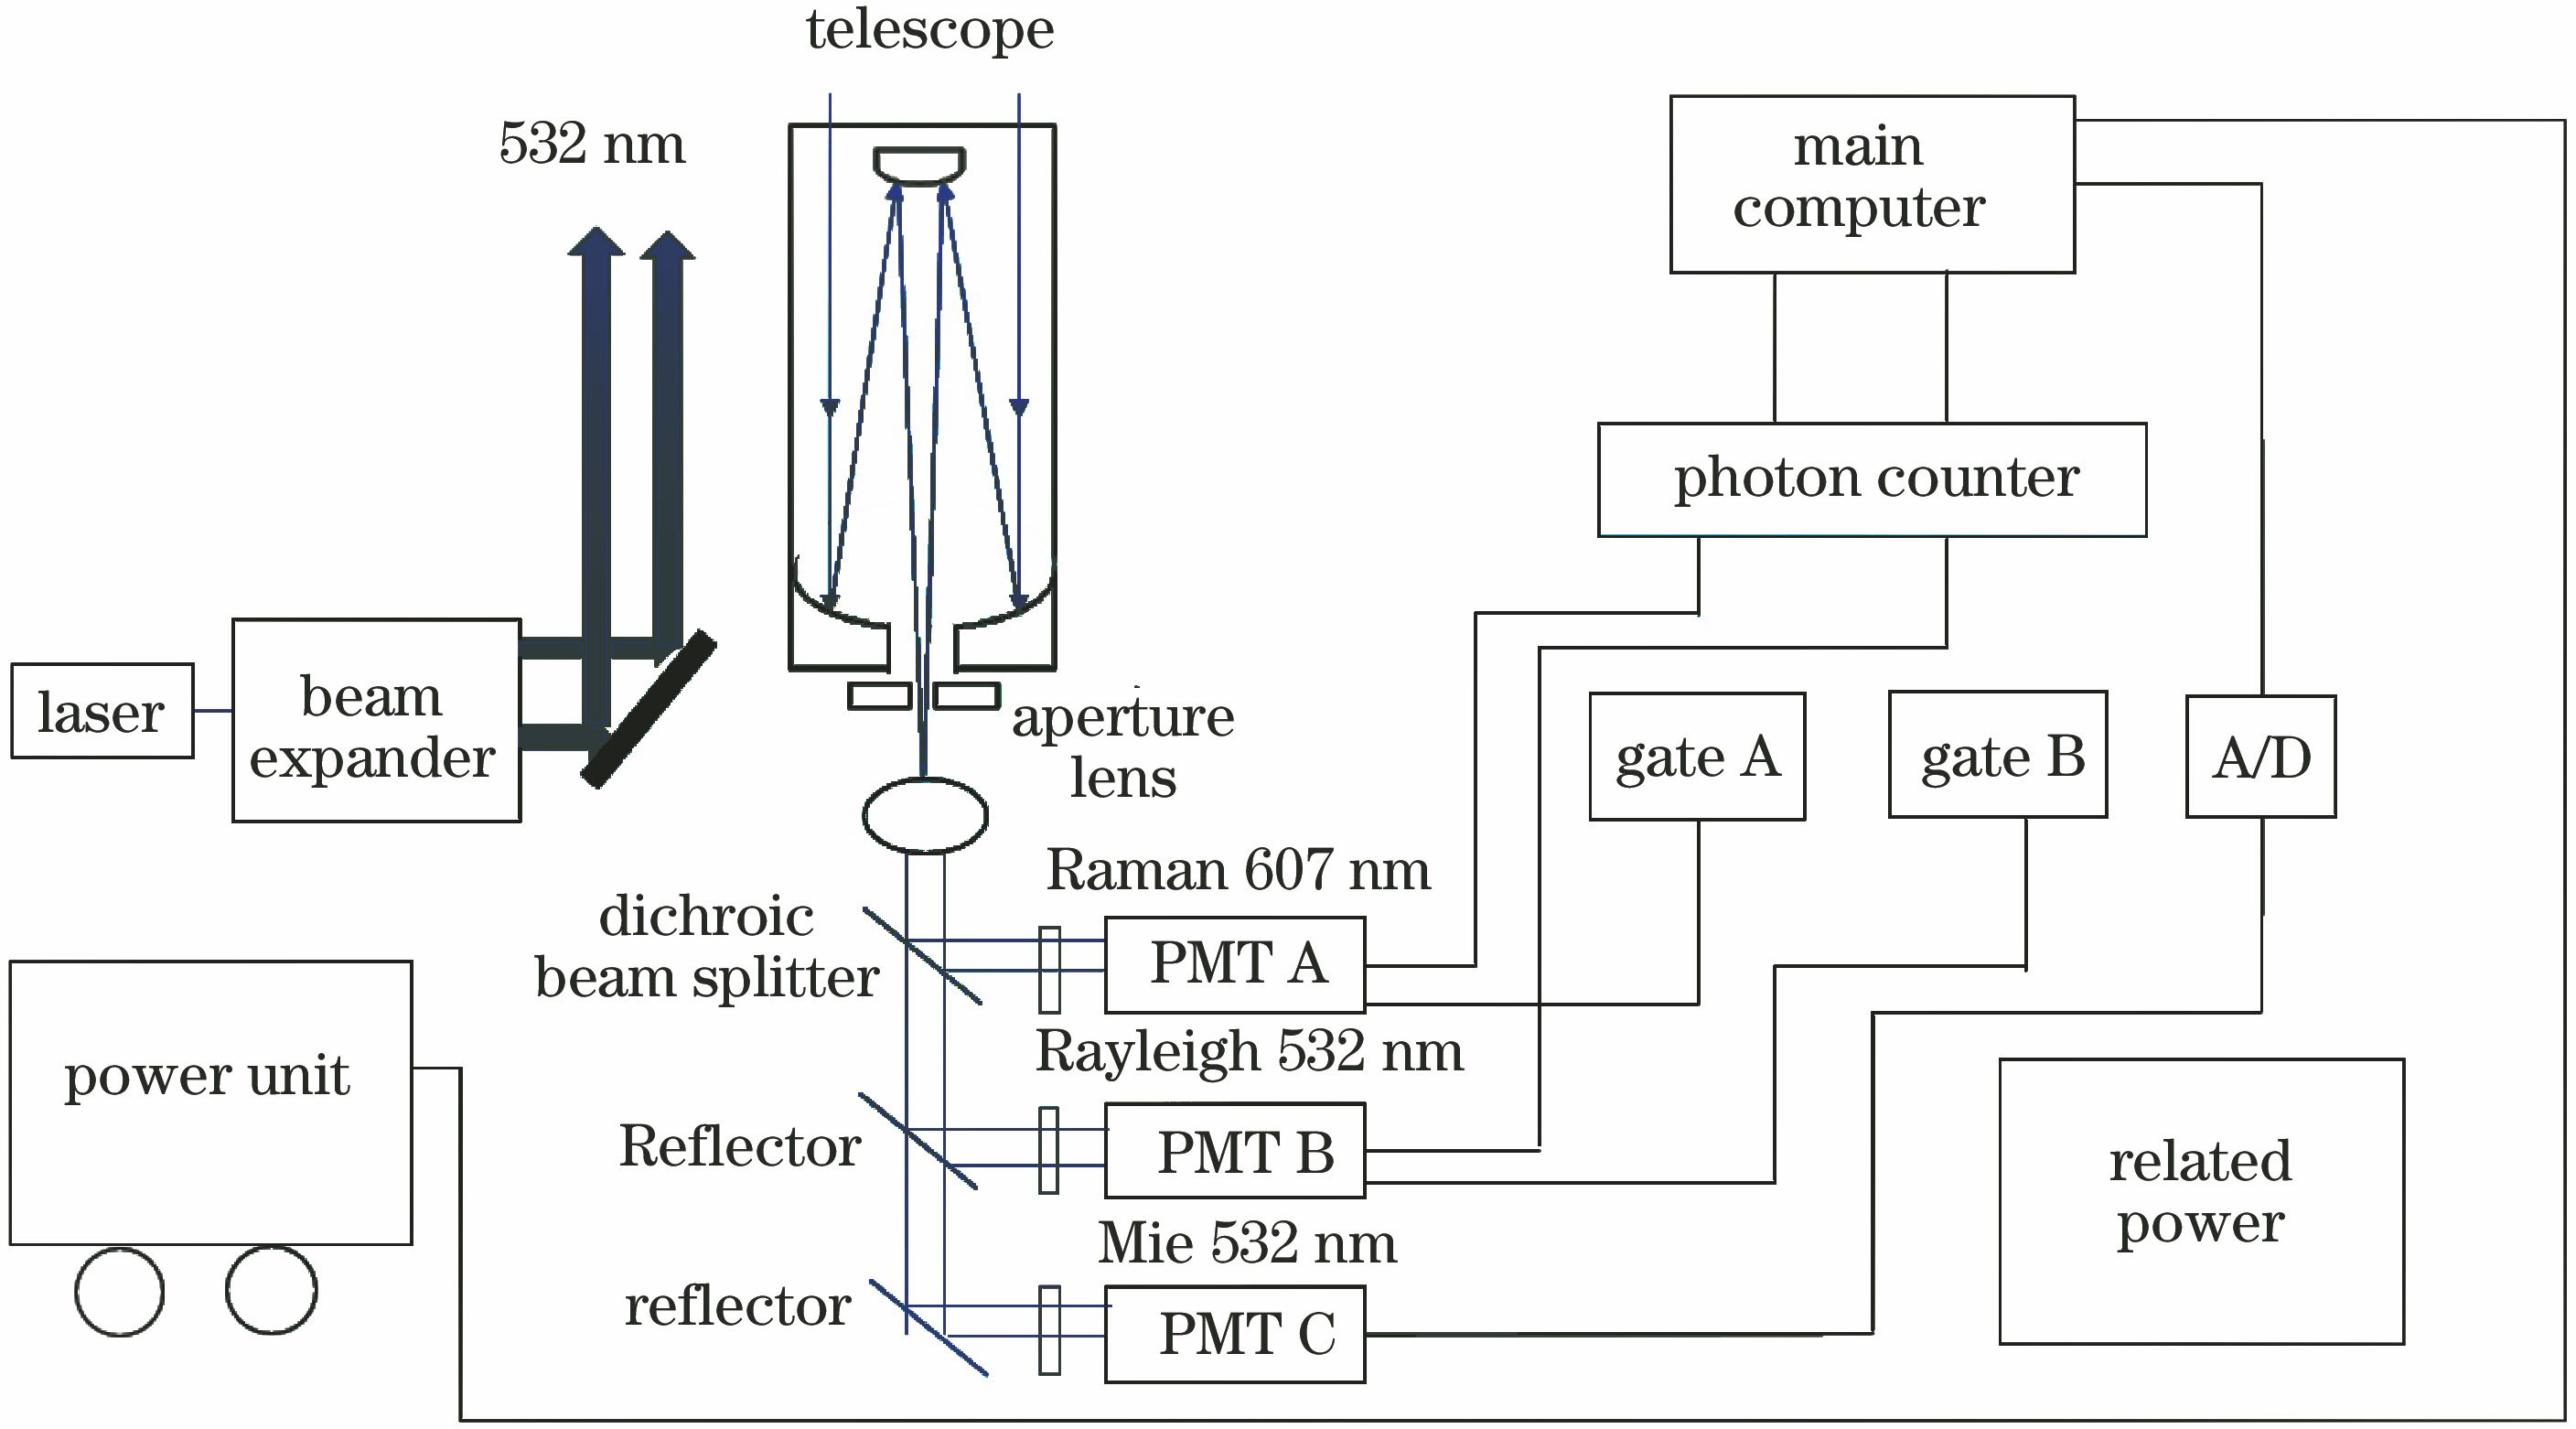 Schematic of the Rayleigh-Raman-Mie lidar